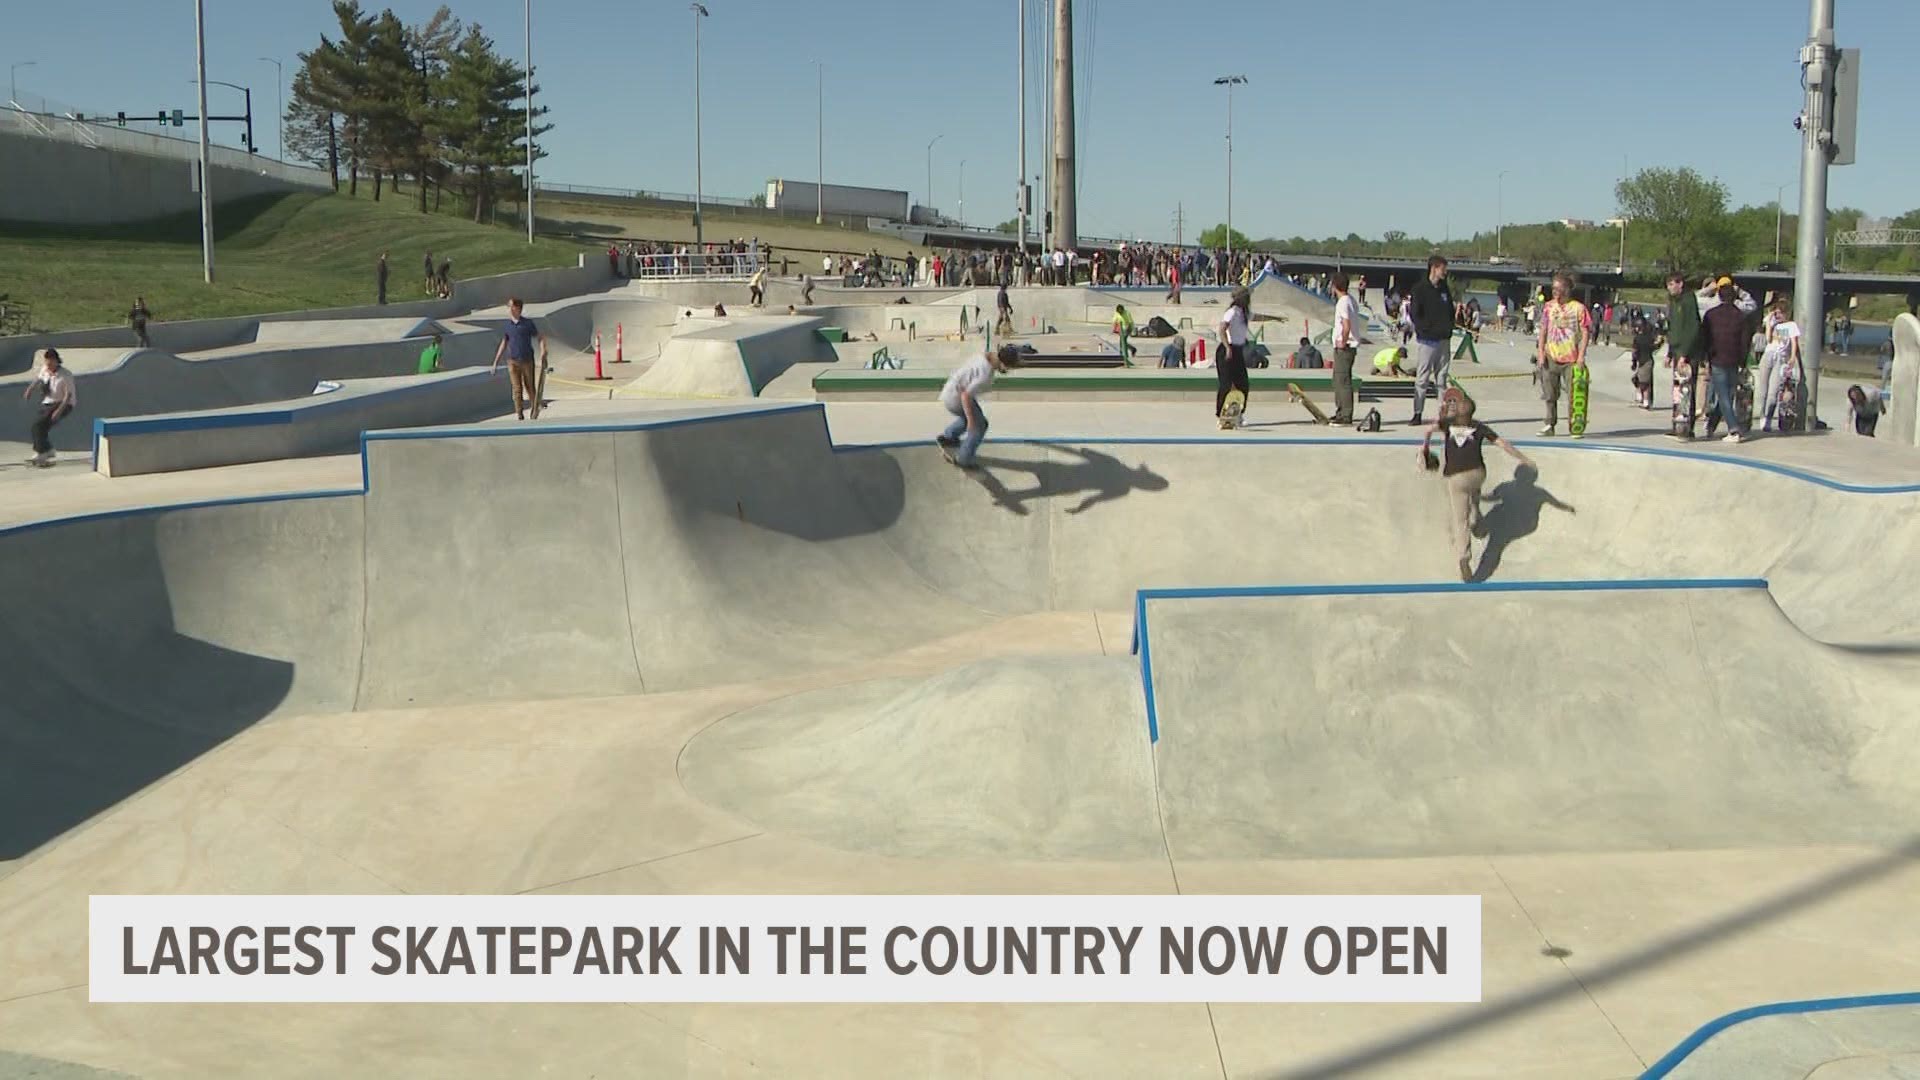 The Lauridsen Skatepark is set to host the Dew Tour May 20-23 and will include the only U.S.-based Olympic skateboard qualifying events for 2021.